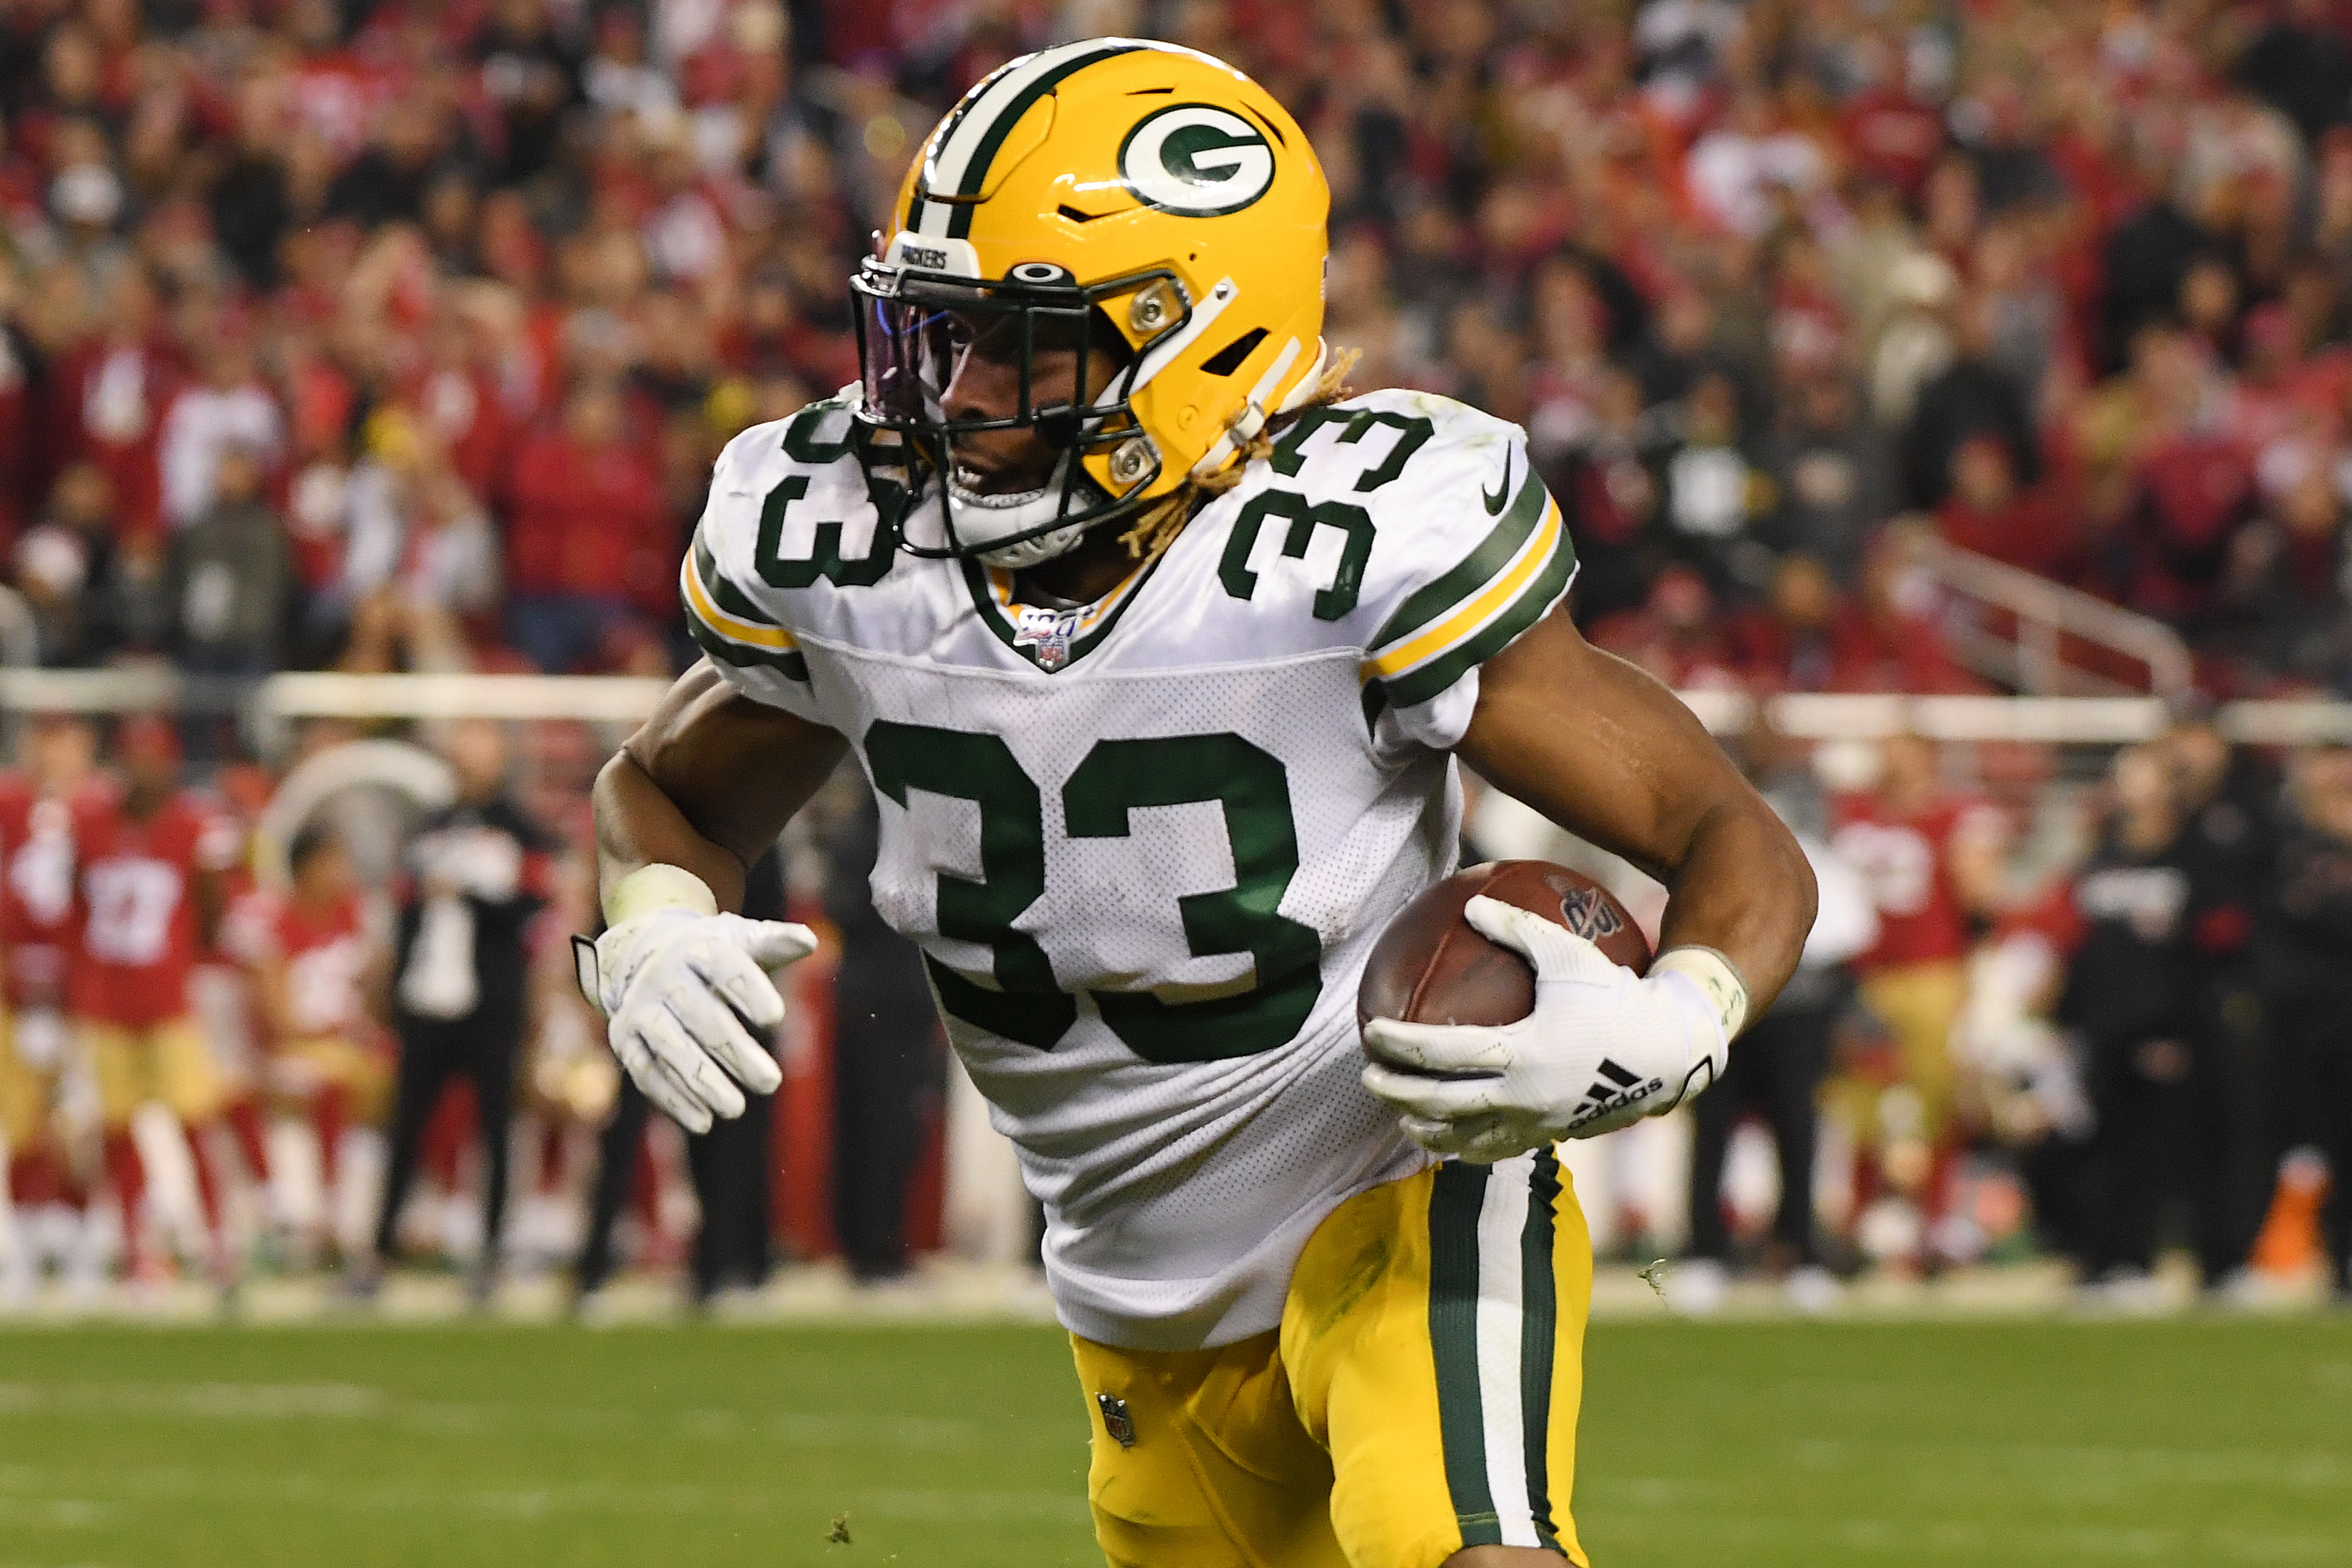 Aaron Jones confirms some good news for Green Bay Packers fans.